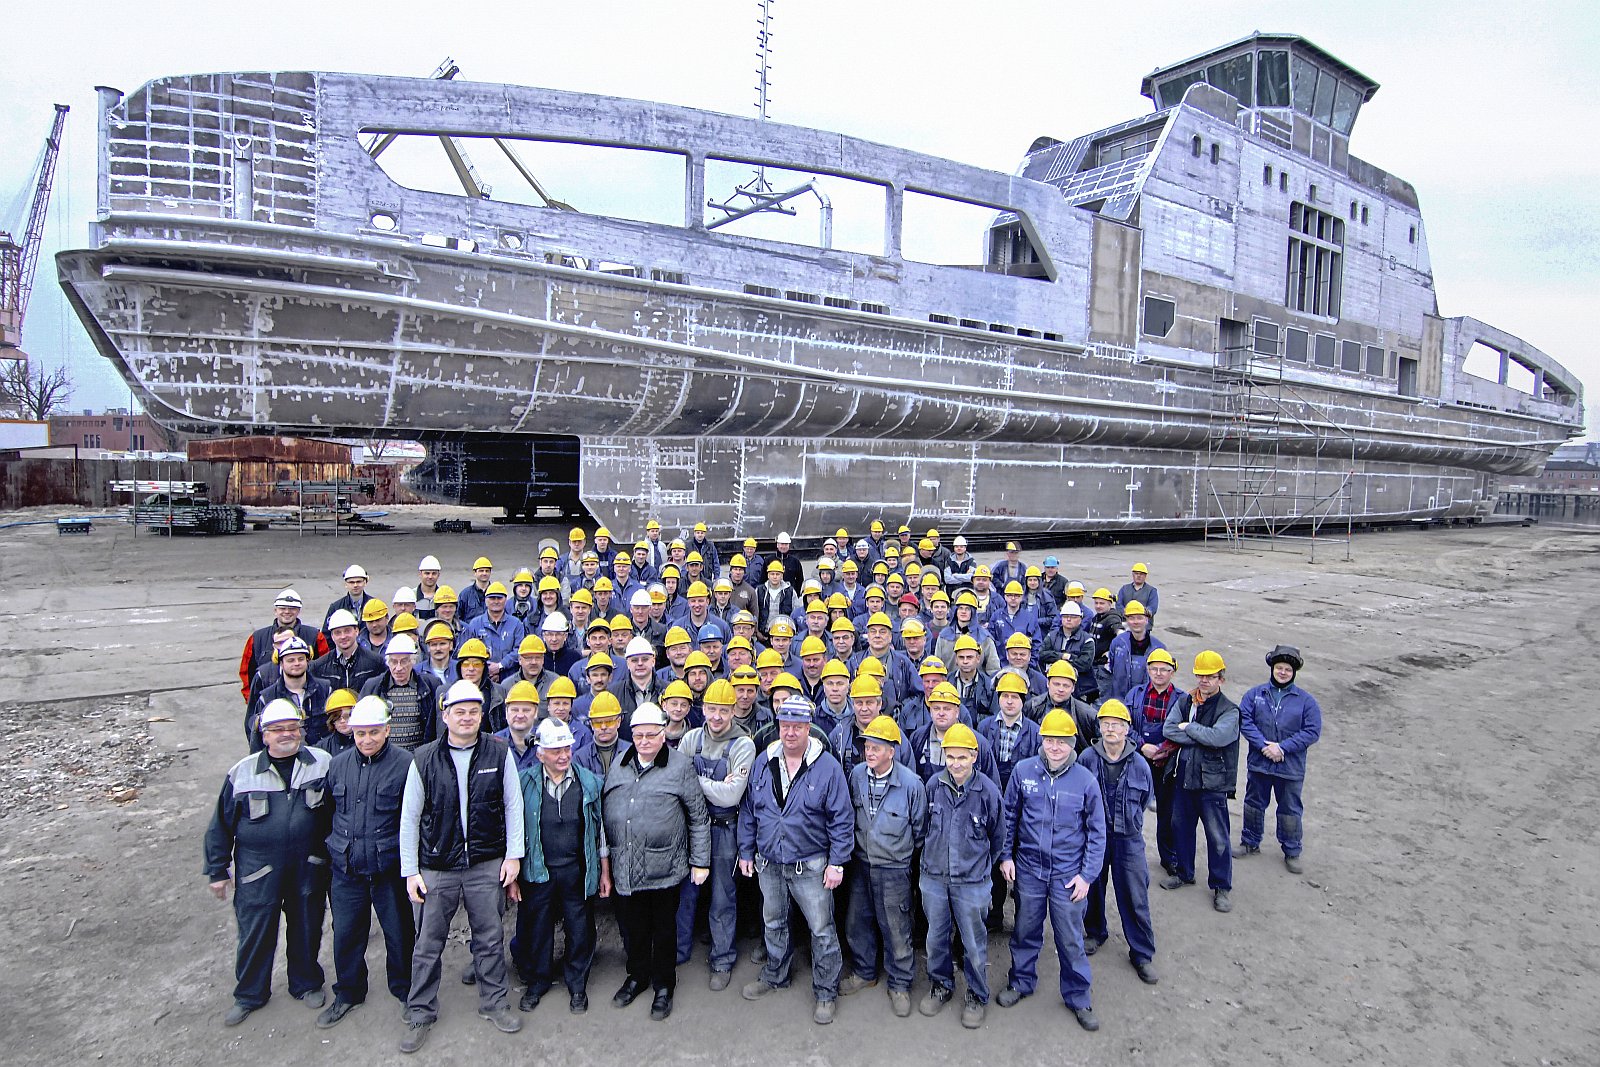 Aluship production team in front of Ampere1 hull, just before it's dispatch (2014)